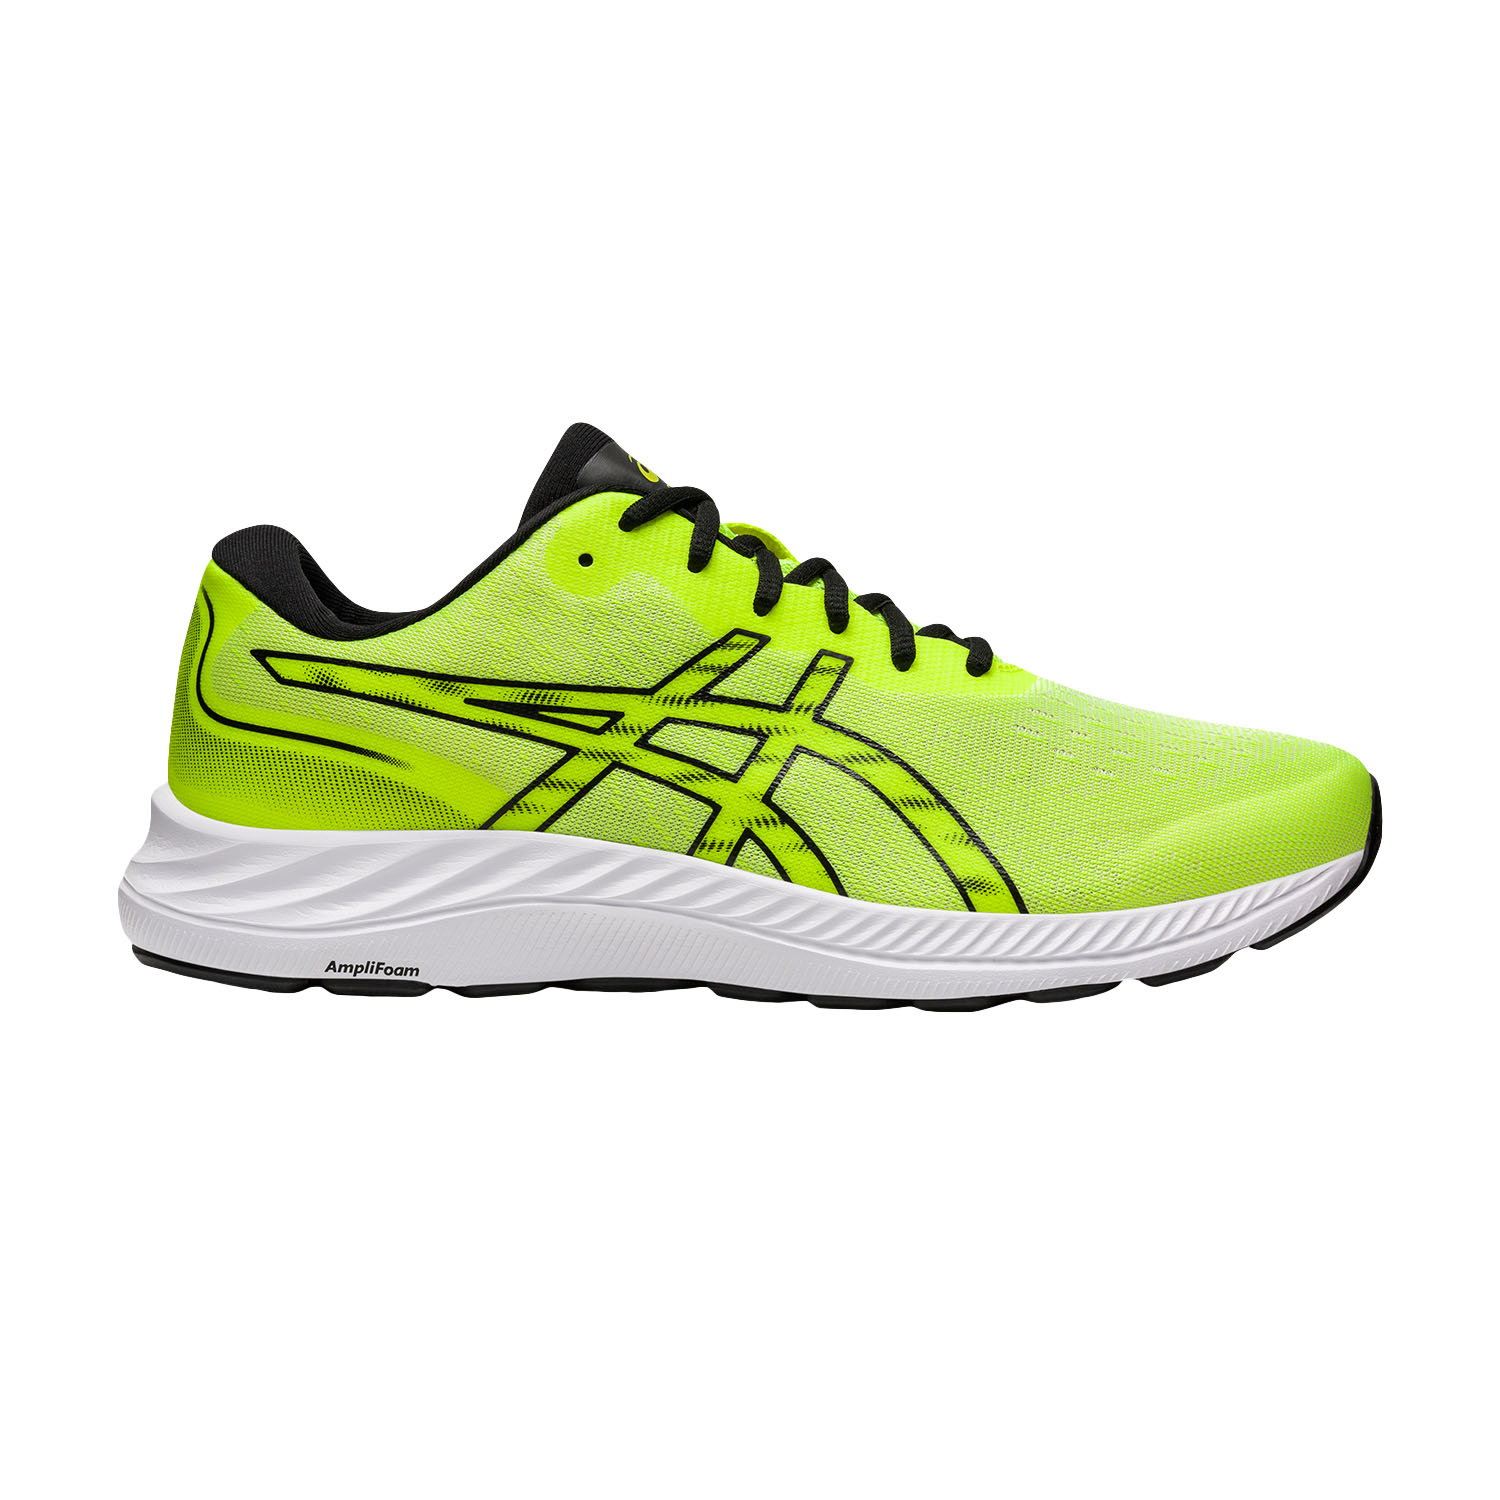 Asics Gel Excite 9 Men's Running Shoes - Safety Yellow/Black